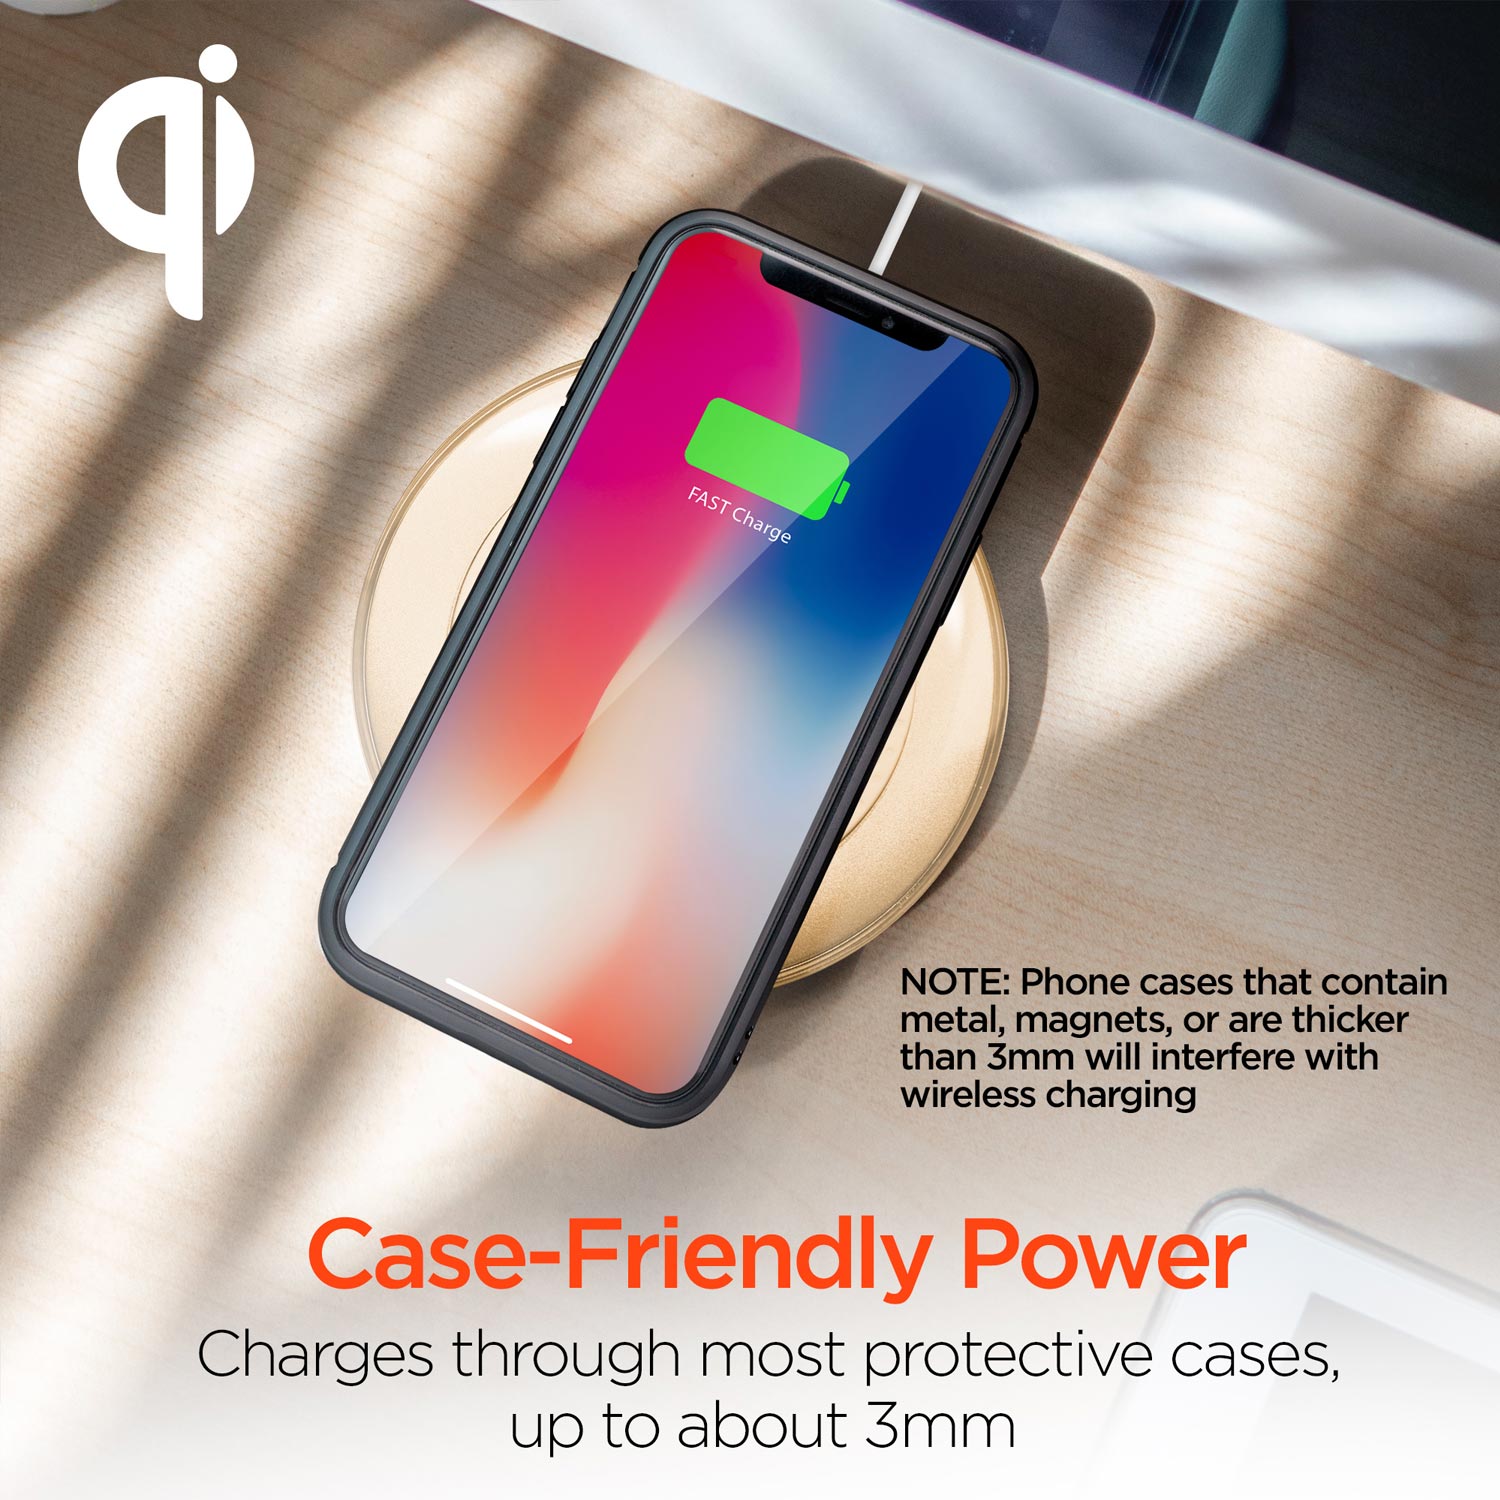 ChargePad Pro Wireless Fast Charger